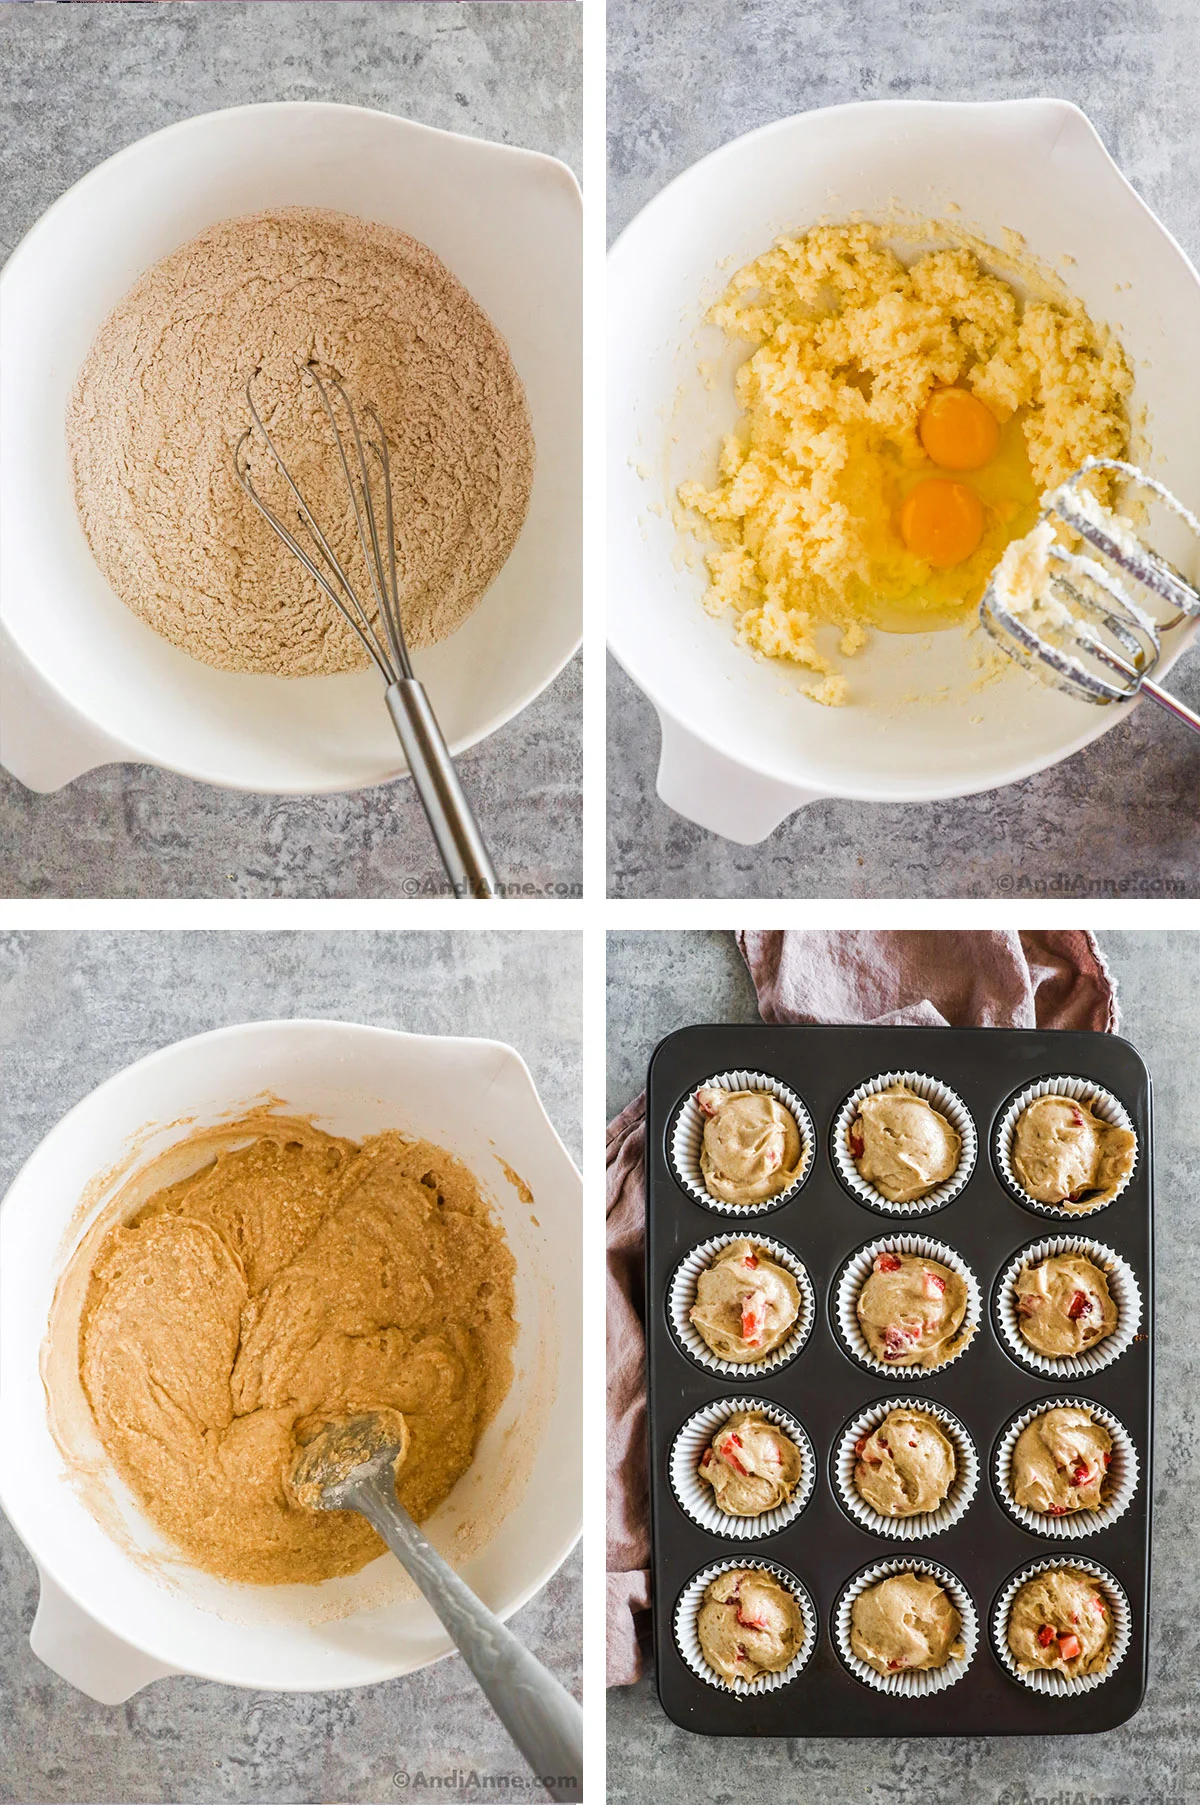 Four images showing steps to make recipe. First is dry ingredients with a whisk in a bowl. Second is beaten butter with two eggs on top and a hand mixer, third is muffin batter in a bowl. Fourth is muffin batter divided in a muffin pan.